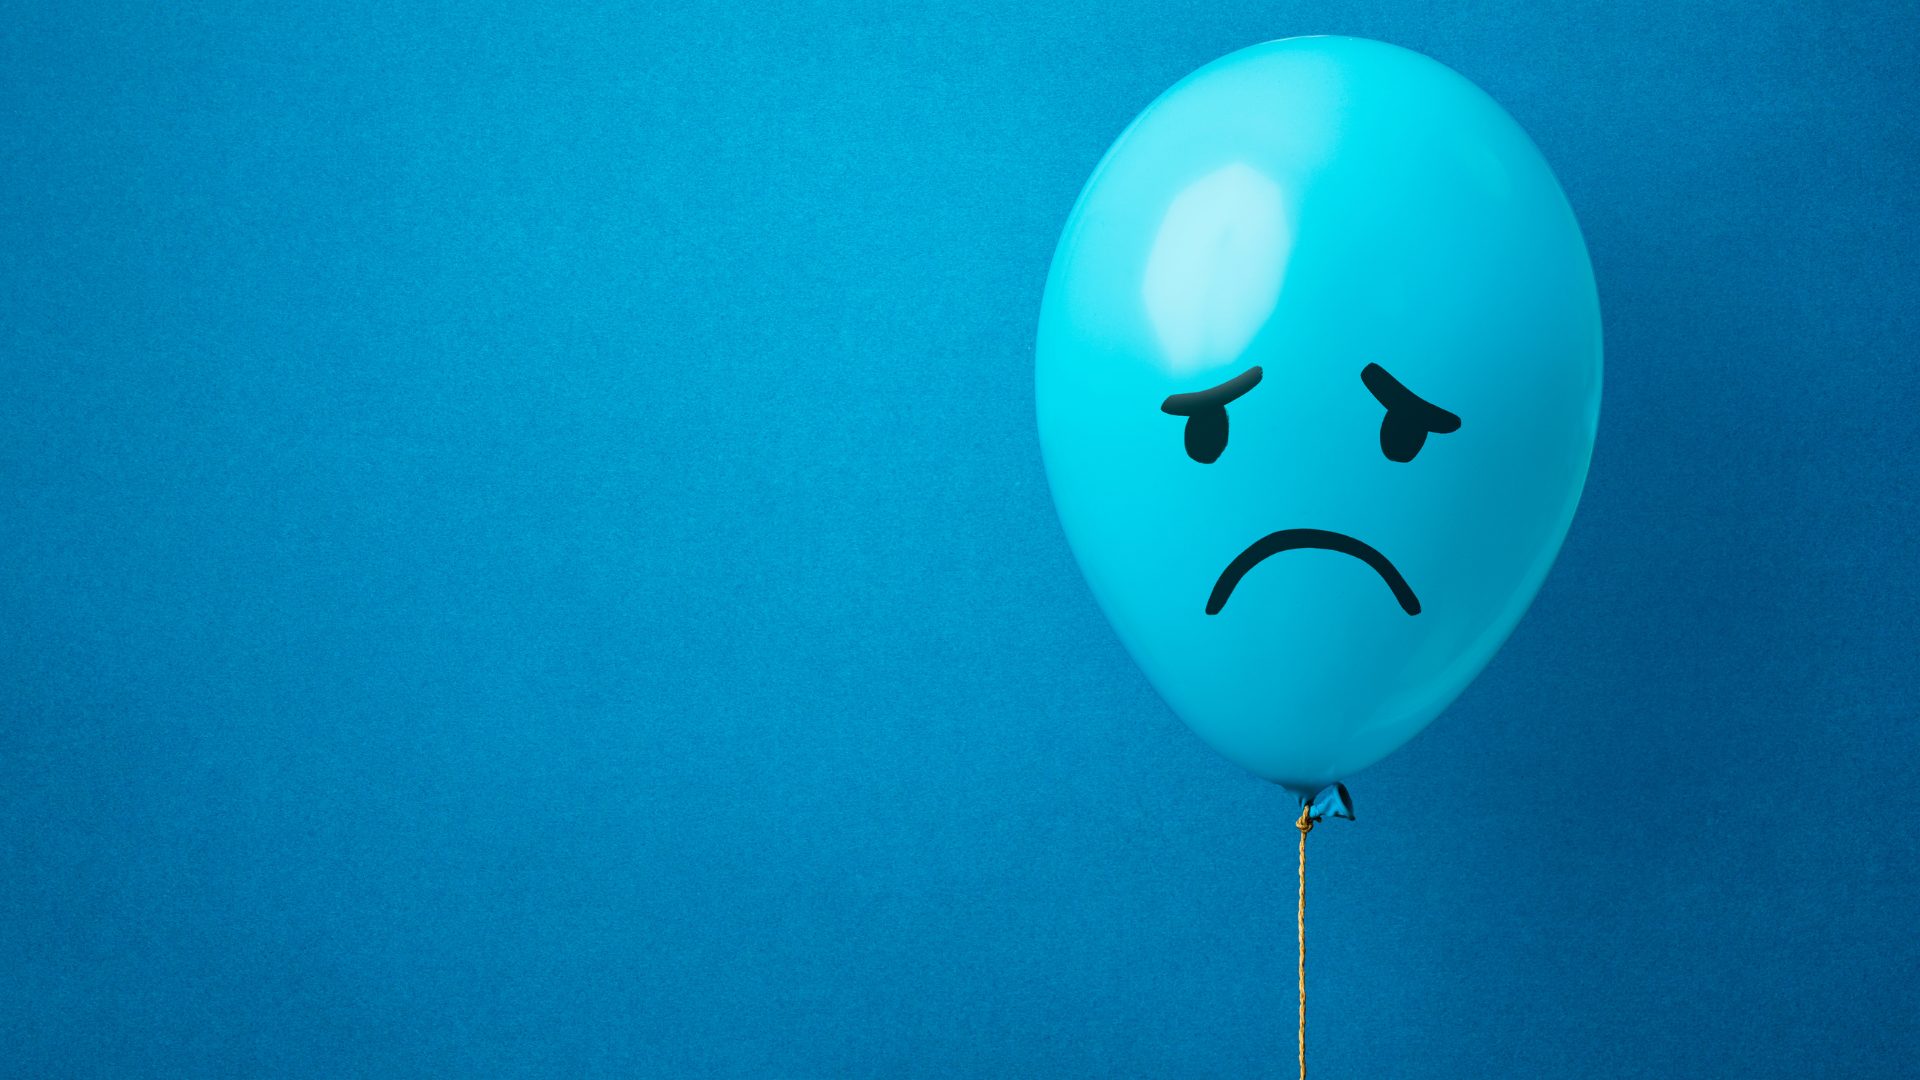 Blue balloon with a sad face on a blue background